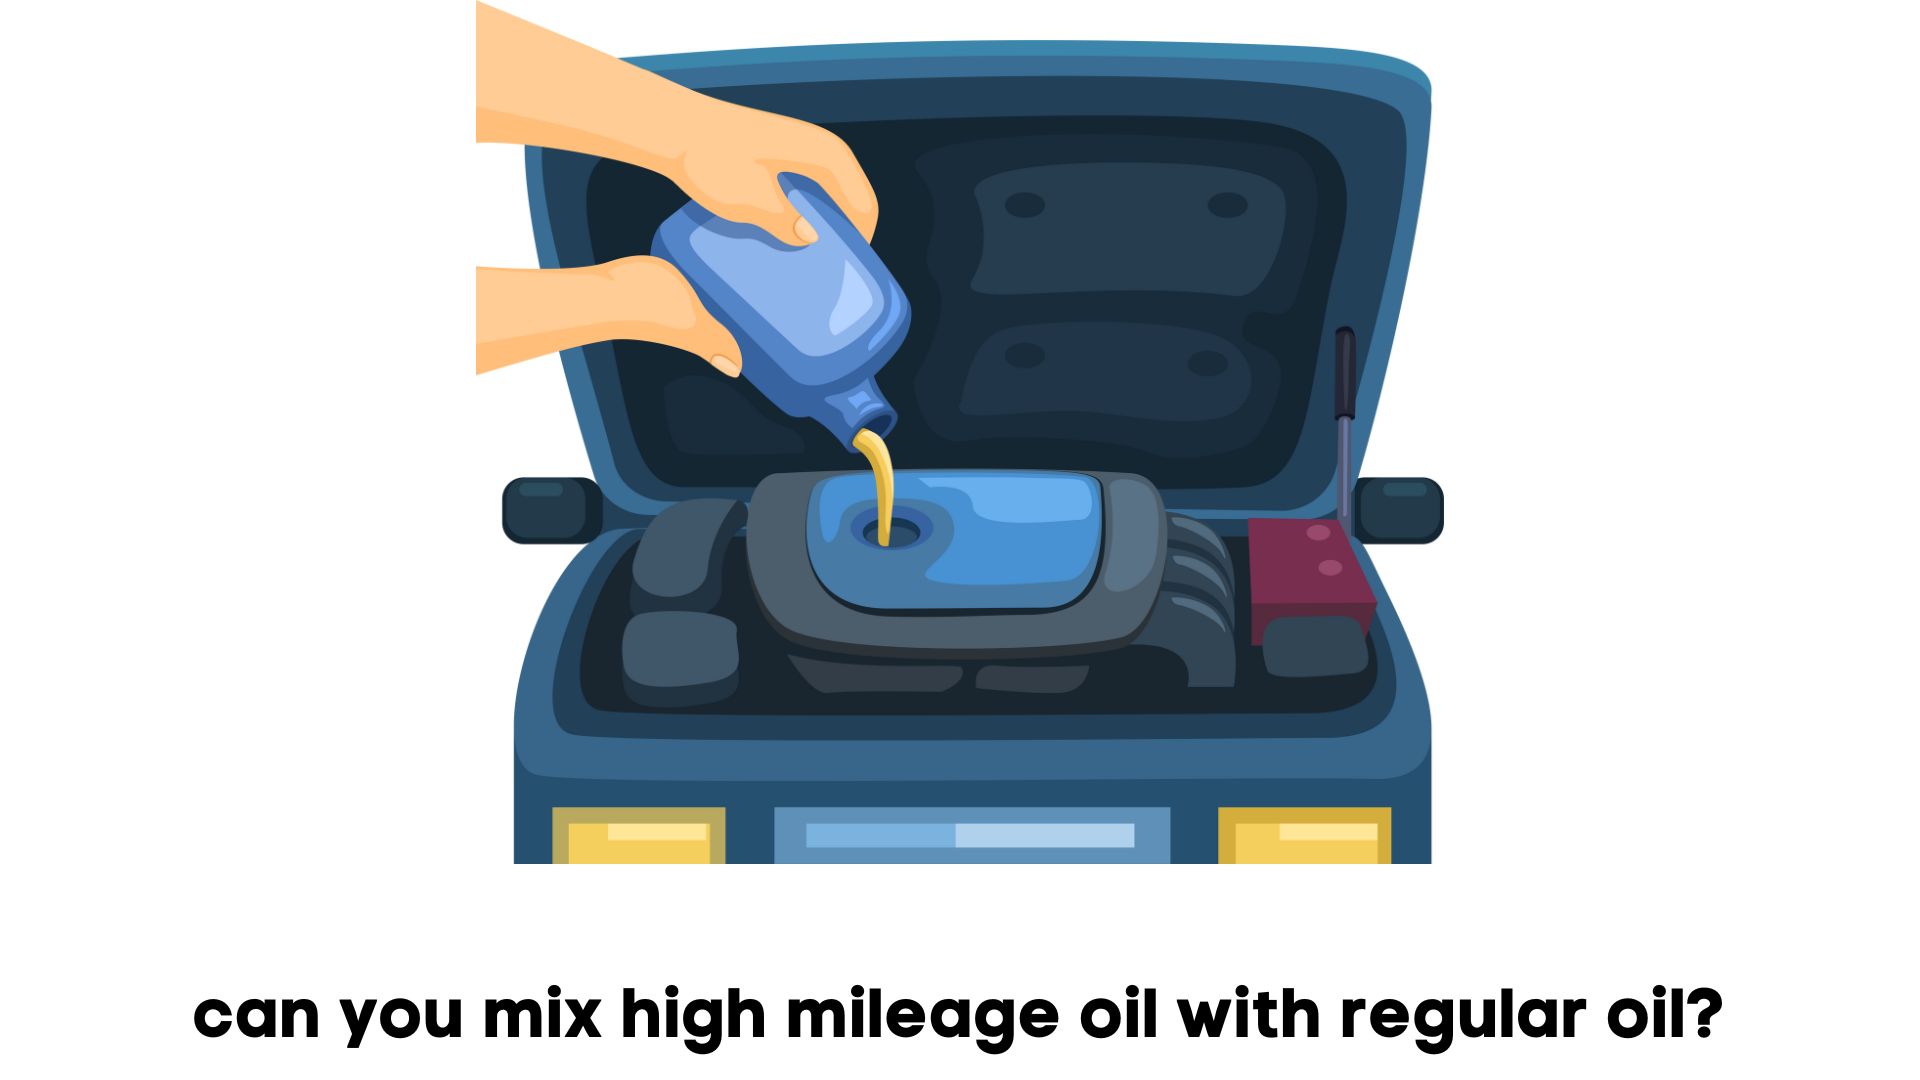 can you mix high mileage oil with regular oil